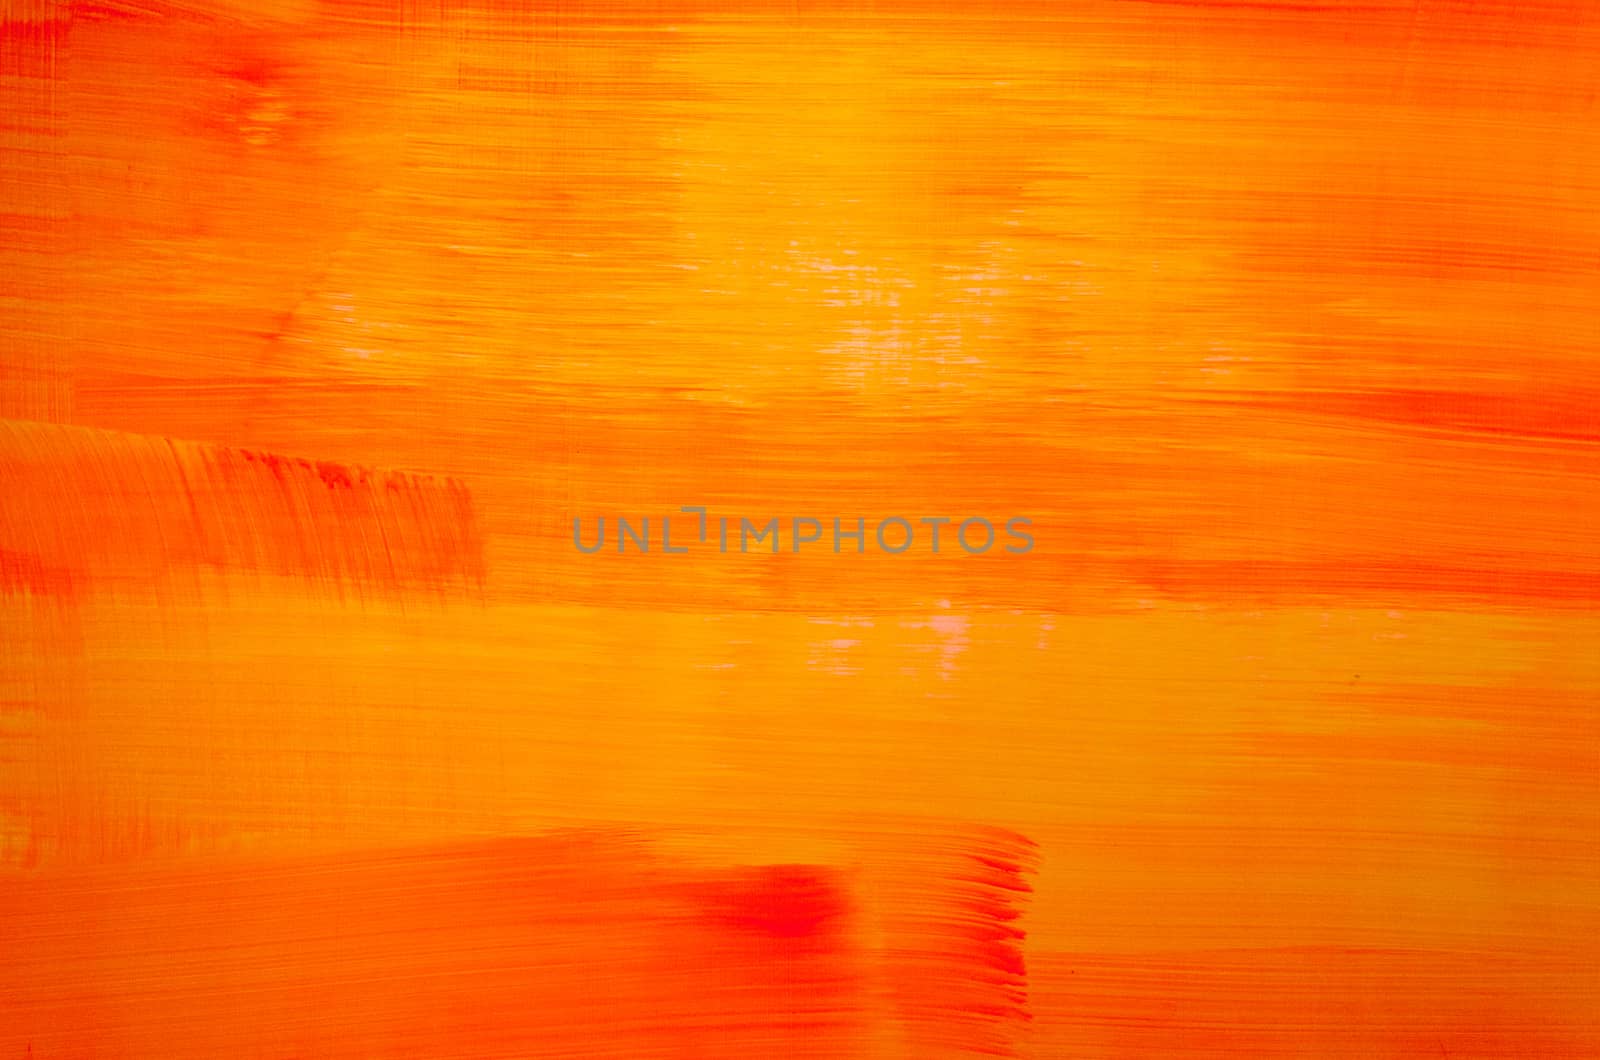 Abstract light red orange patterned wallpaper
